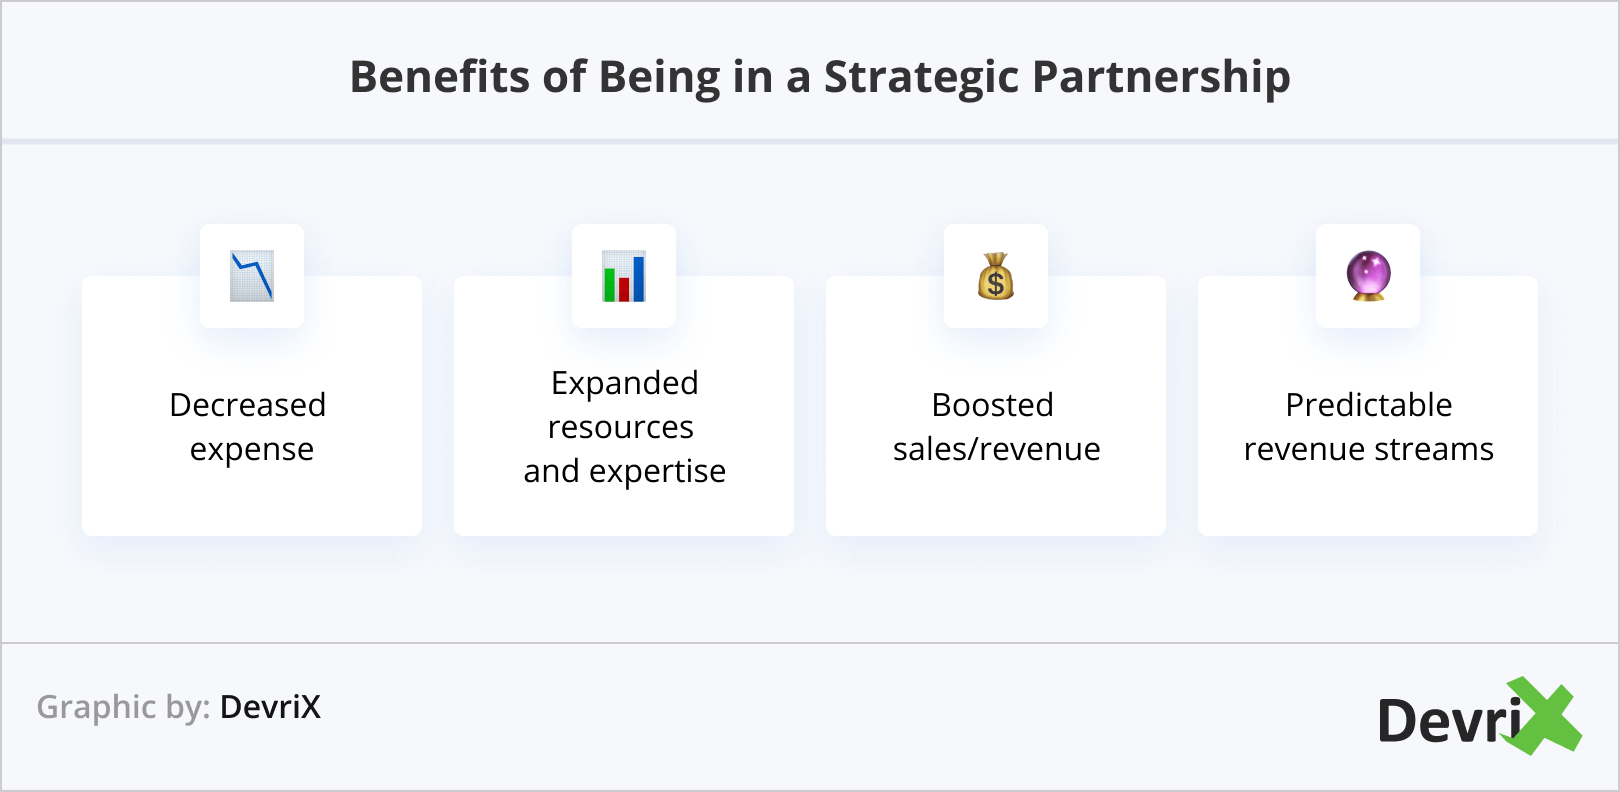 Benefits of Being in a Strategic Partnership